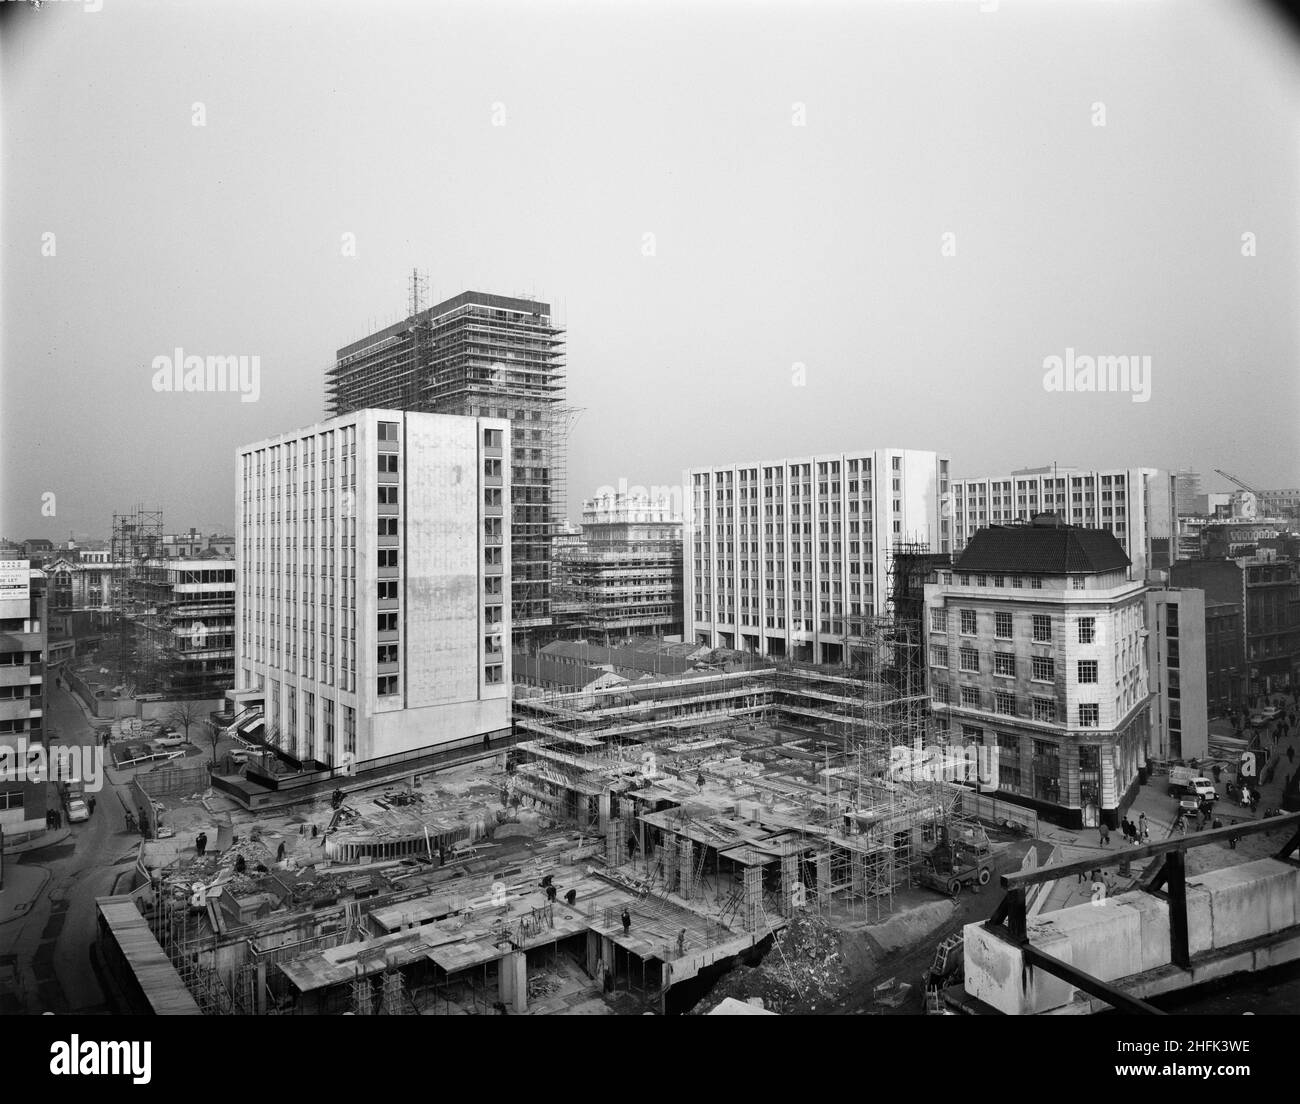 Paternoster Square, City of London, 16/01/1964. Looking north-east across the Paternoster development during its construction, showing completed blocks and some under construction including Sudbury House. Work on the Paternoster development was carried out in a joint venture by John Laing Construction Limited, Trollope and Colls Limited, and George Wimpey and Company Limited. The scheme involved the redevelopment of a seven acre site on the north side of St Paul&#x2019;s Cathedral. The site had been almost entirely devastated during an incendiary raid in December 1940. The development consiste Stock Photo